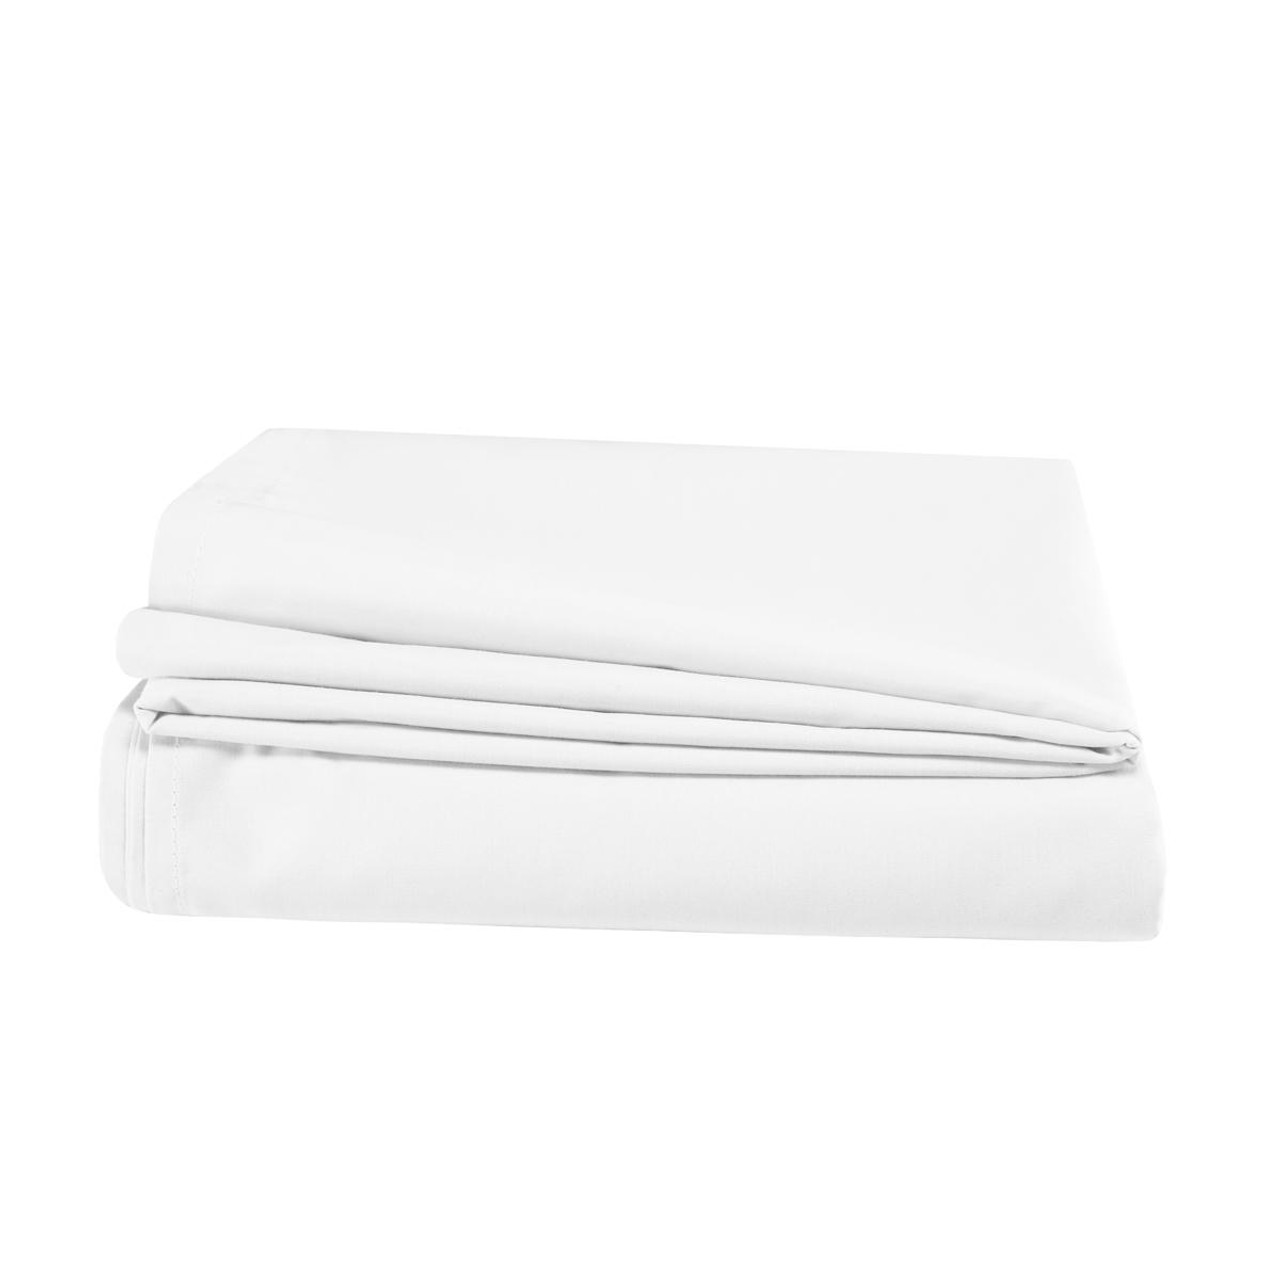 Low Cost 180TC Easy Iron Percale Flat Sheets With Price Promise Guarantee